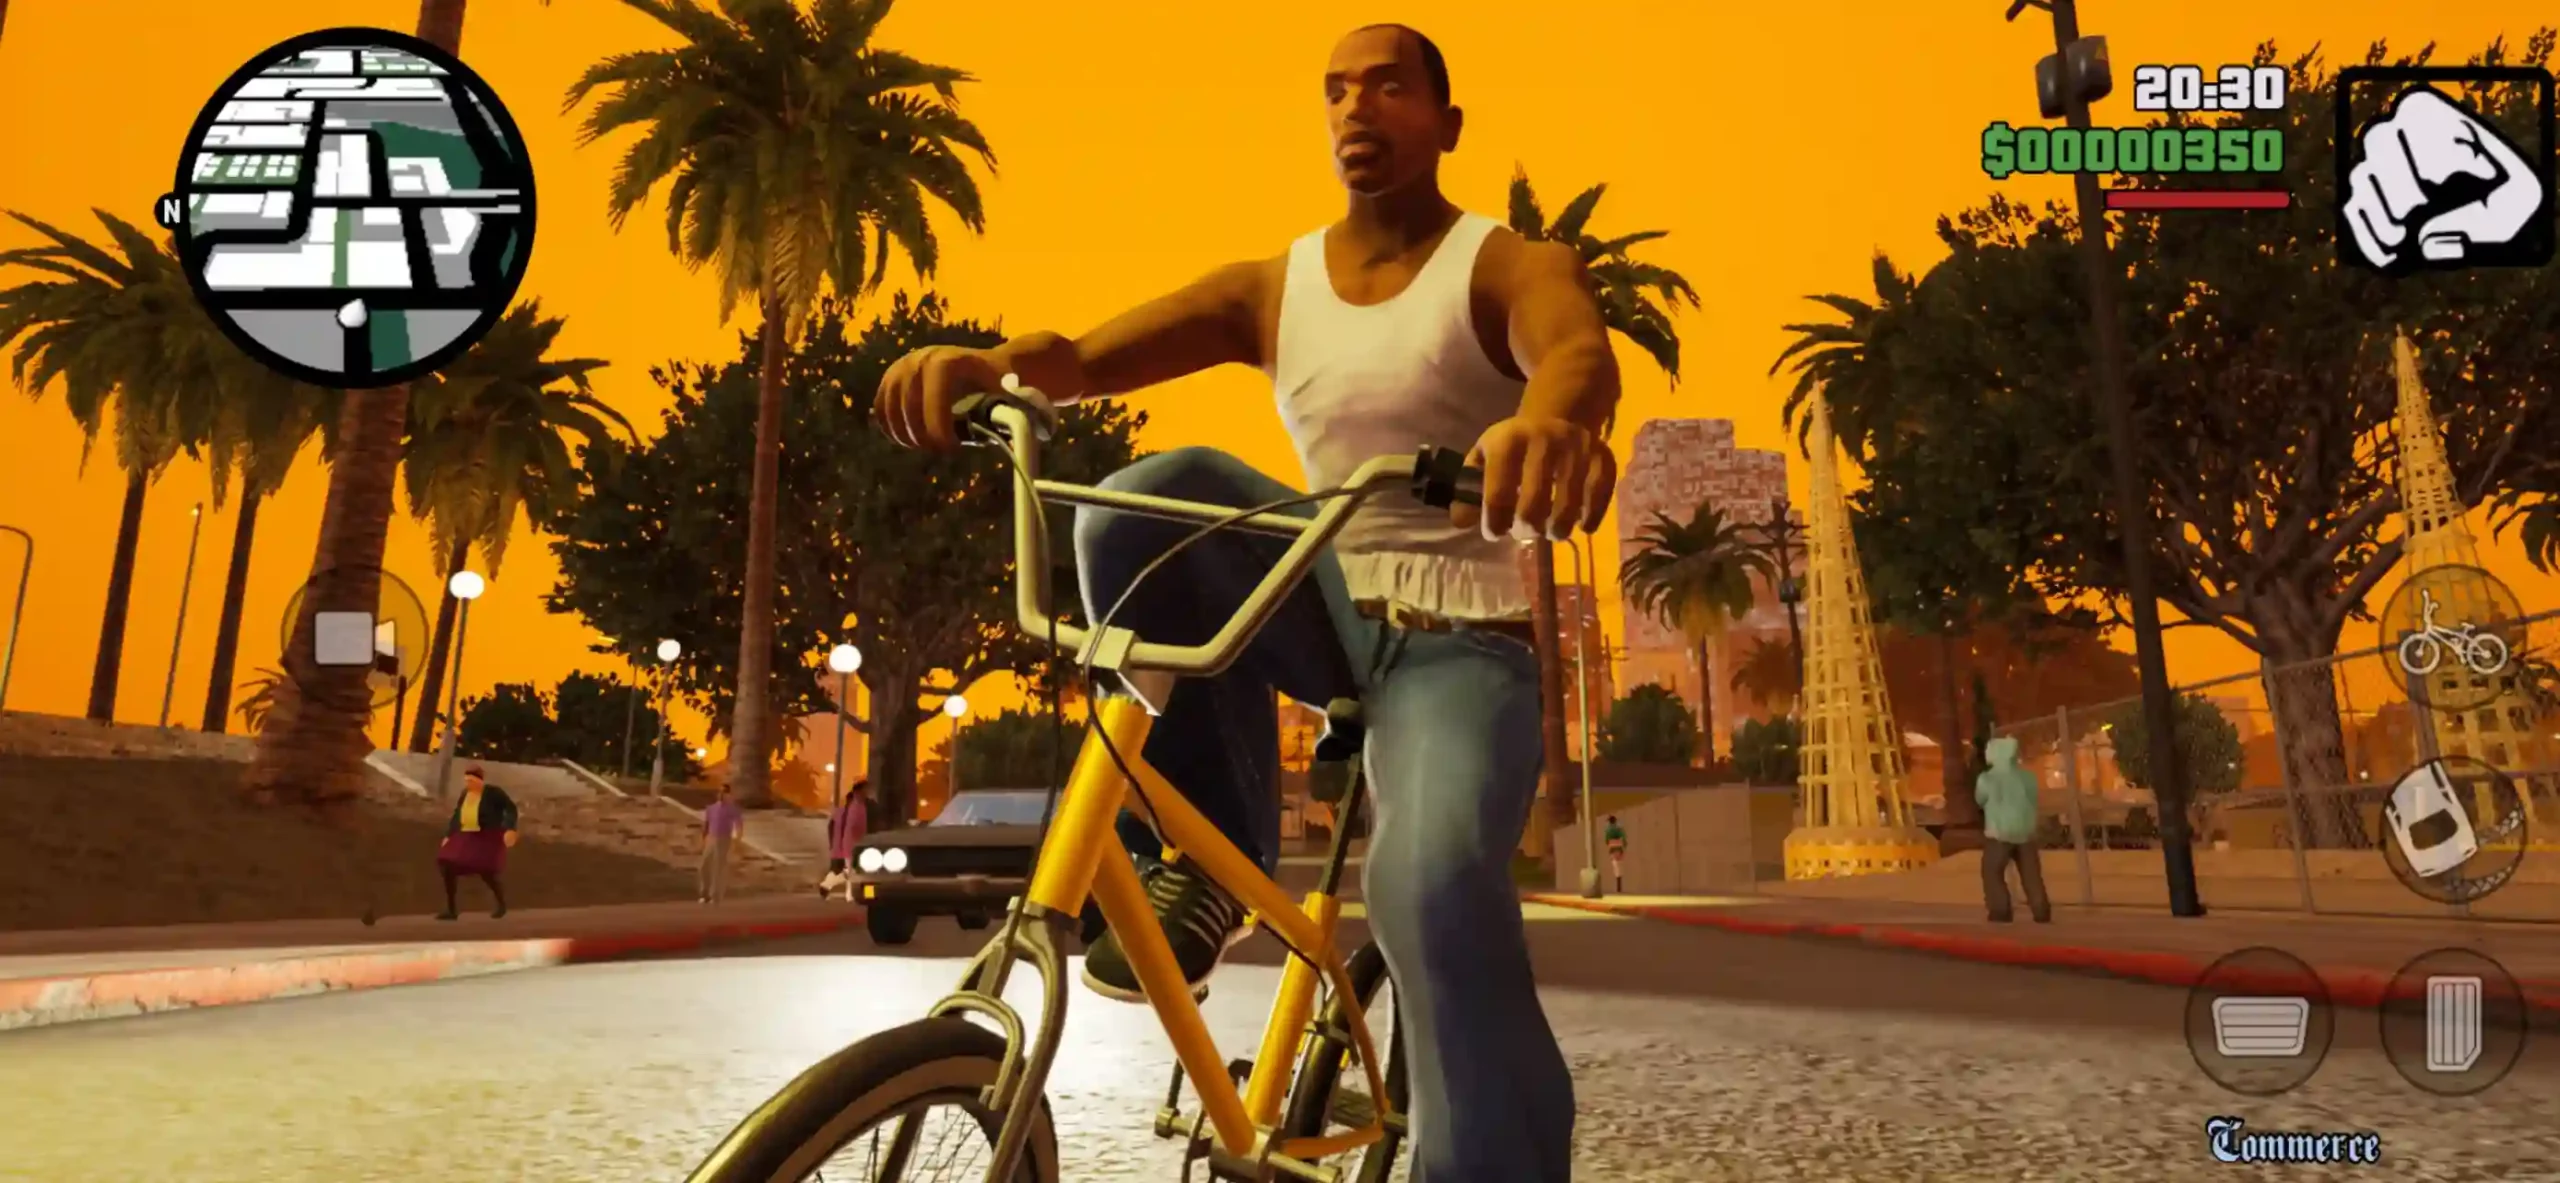 About the GTA San Andreas Netflix